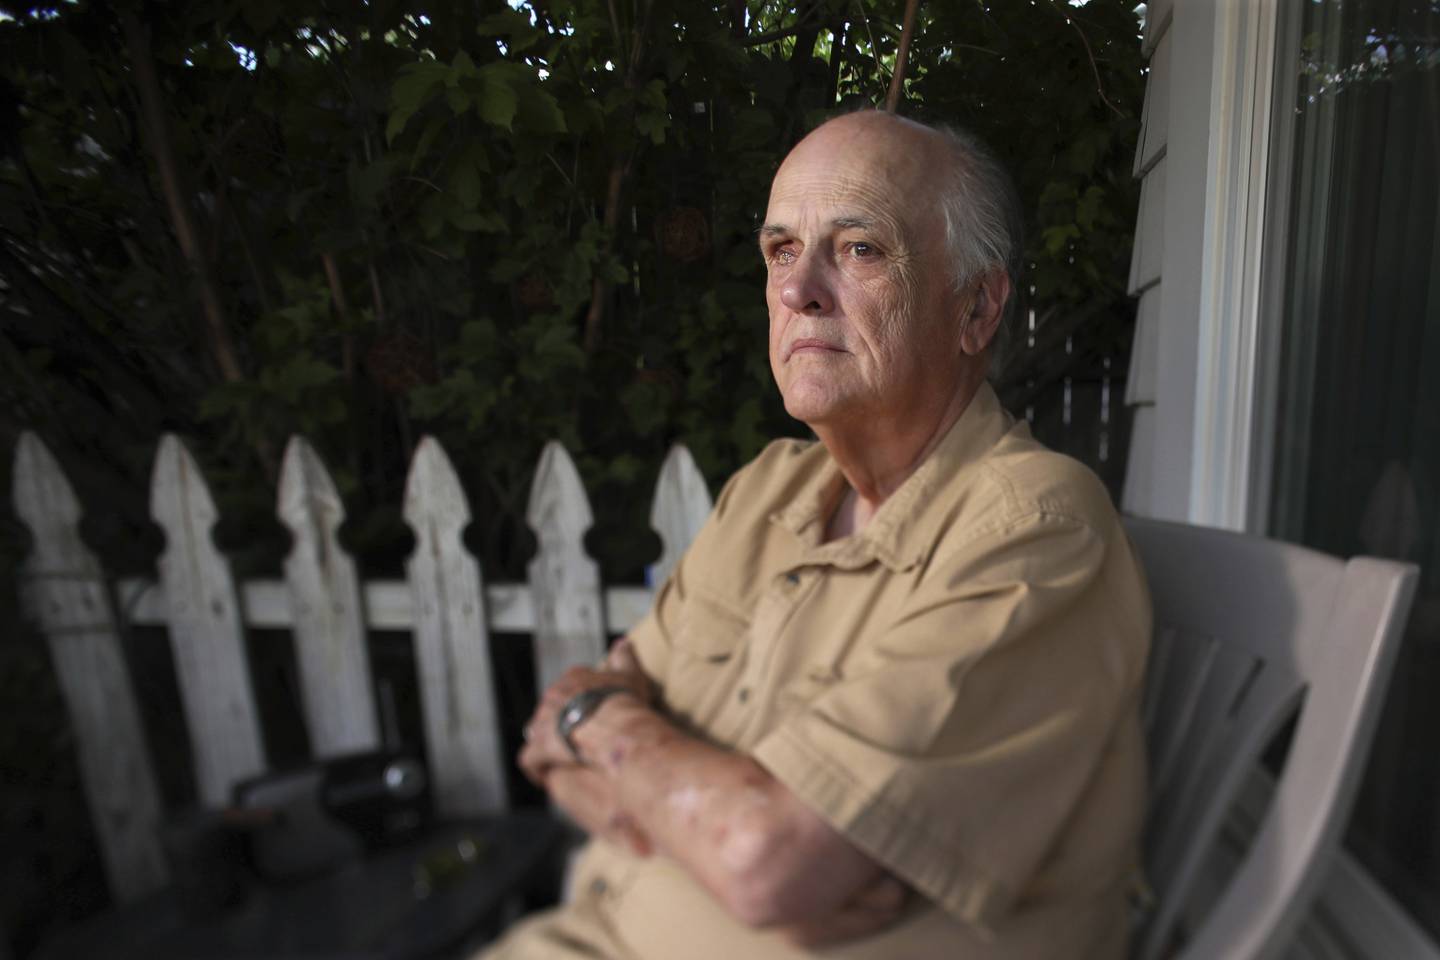 Former Chicago police Detective Jimmy Gildea, shown in July at his Chicago home, declined to get involved with the revived Tylenol investigation. 